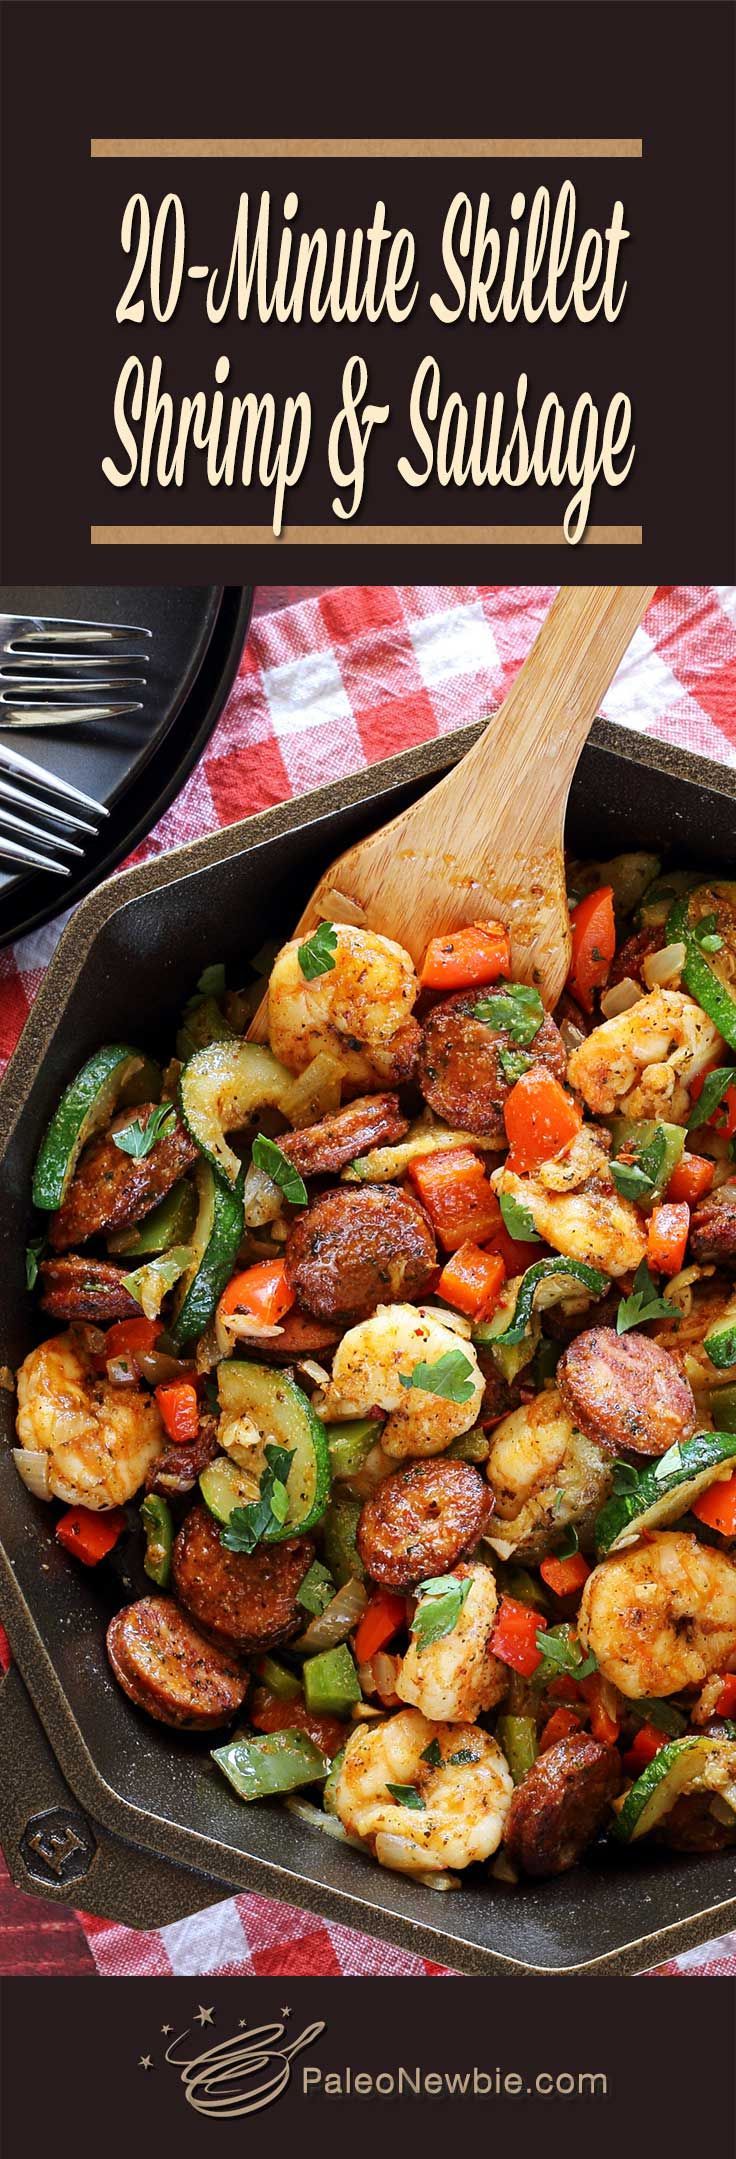 You’ll have this Smoked Sausage & Shrimp Paleo Skillet on the table and ready to eat in 20 easy minutes!